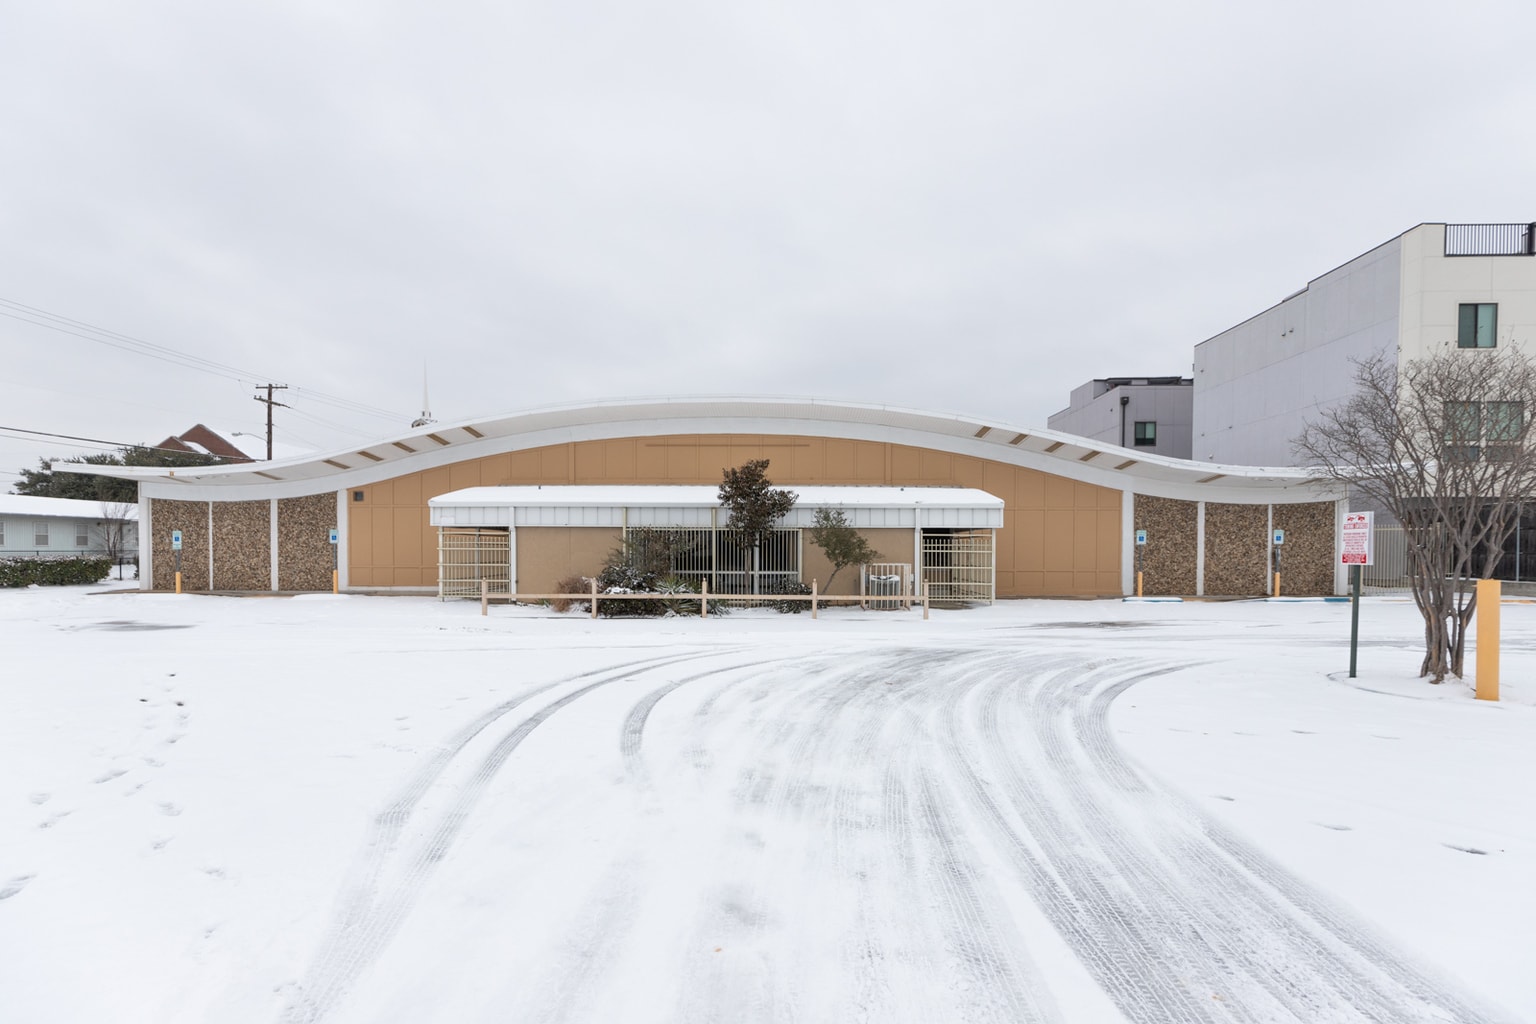 An abandoned mid century grocery story on a snowy day in Dallas